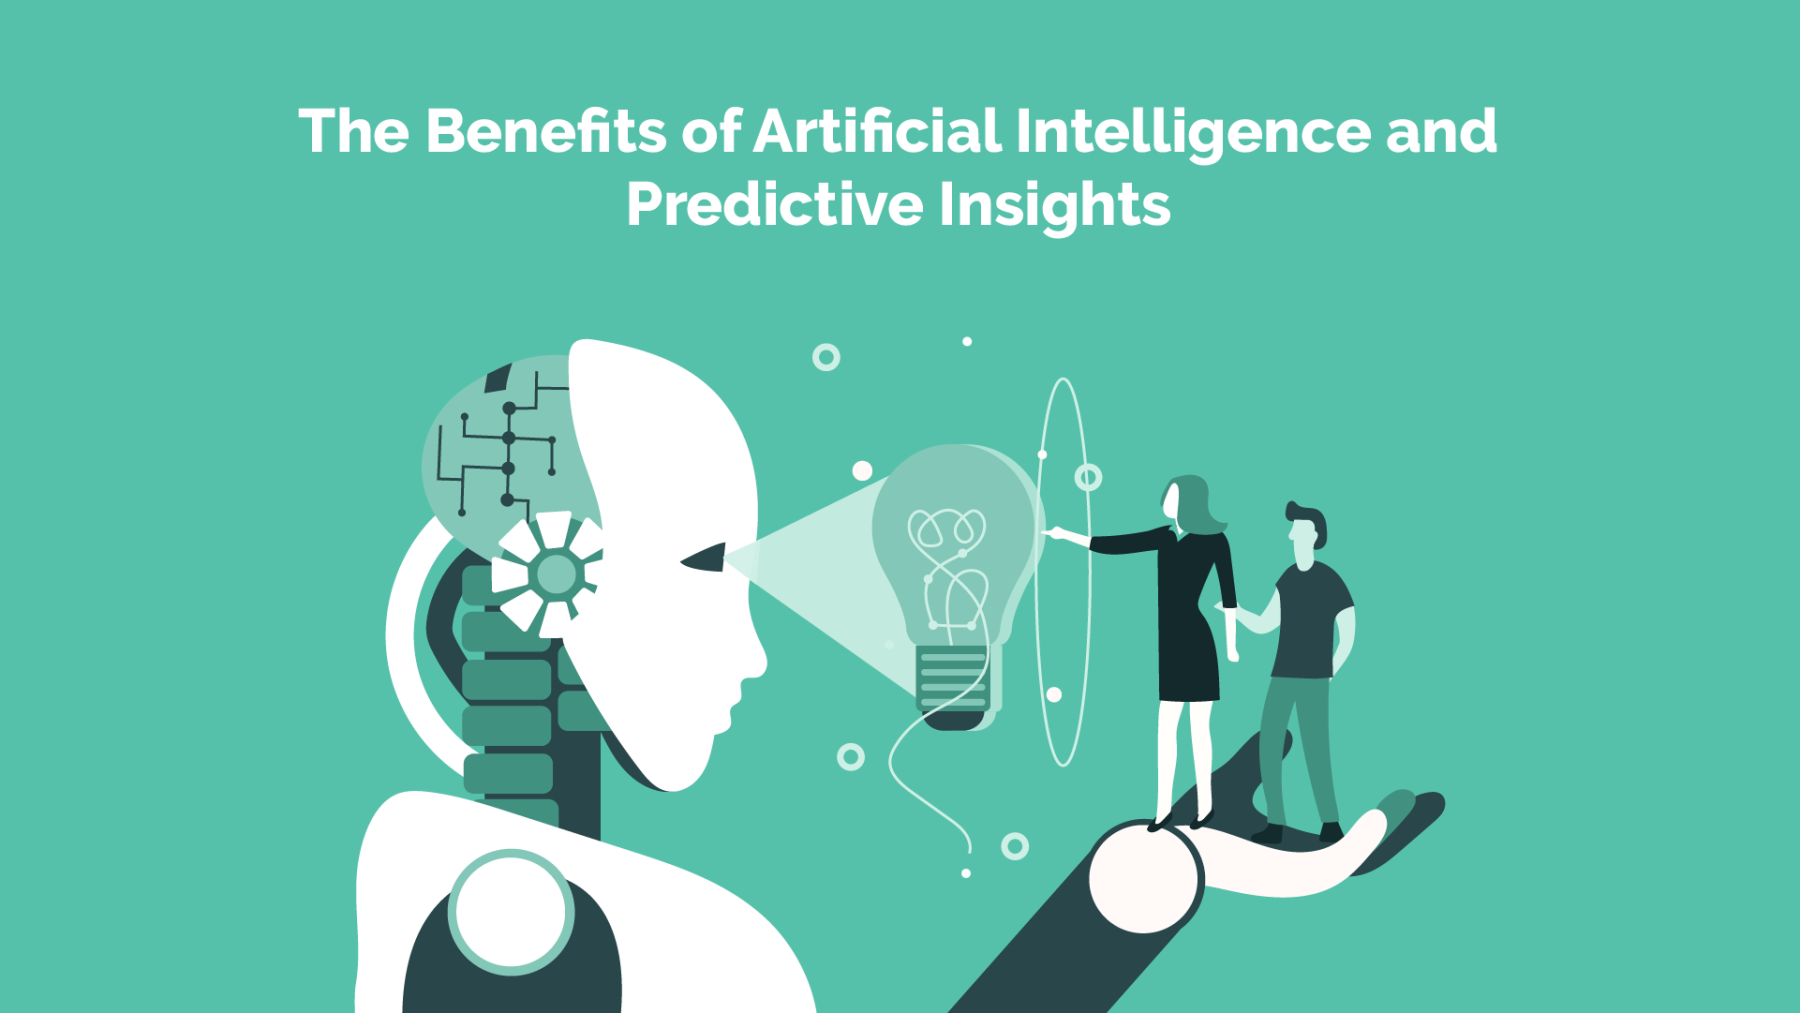 20220205.fya_.The-Benefits-of-Artificial-Intelligence-and-Predictive-Insights.0